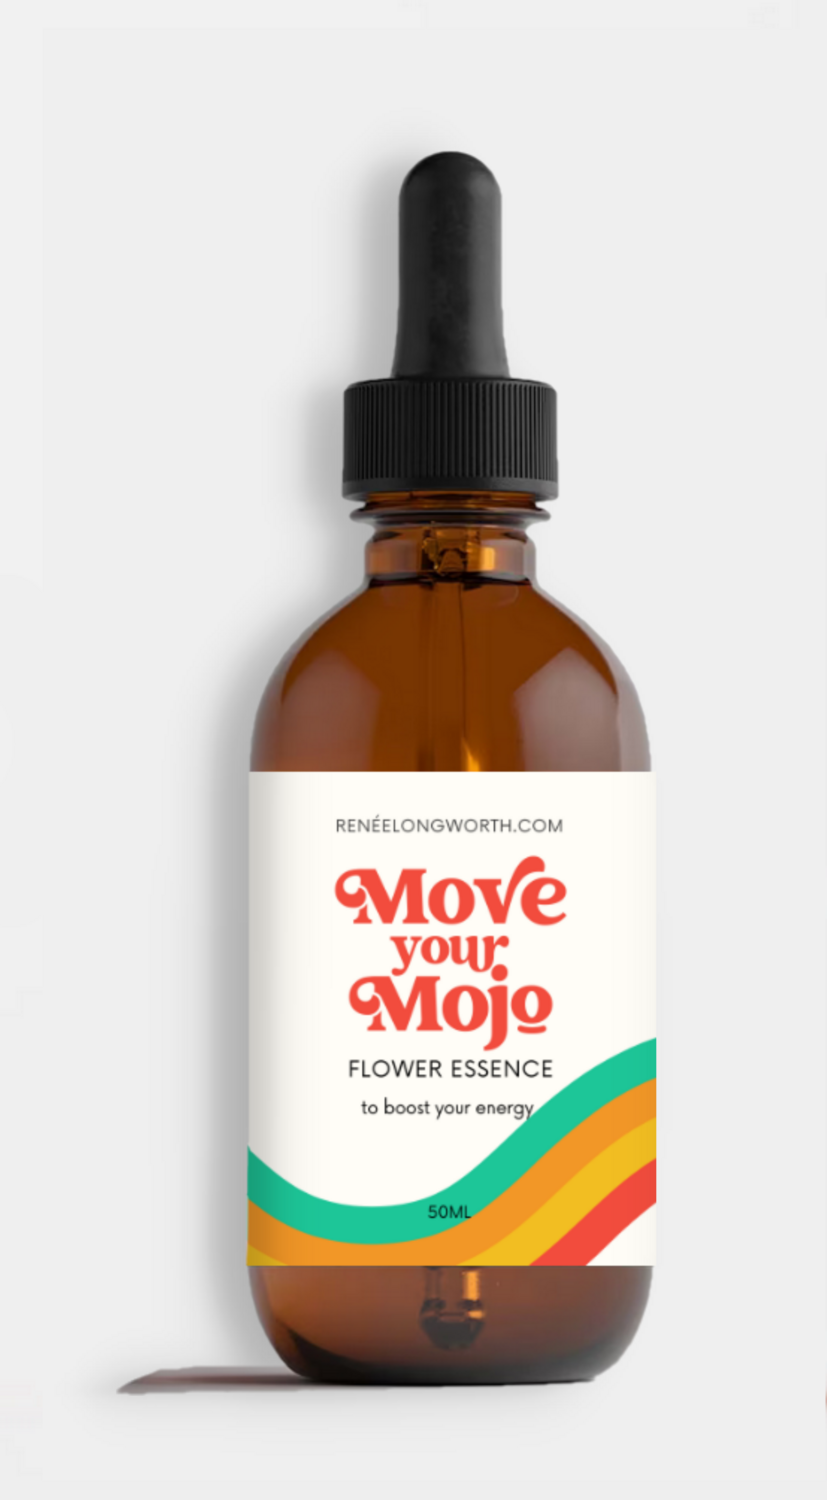 Move your Mojo Flower Essence remedy